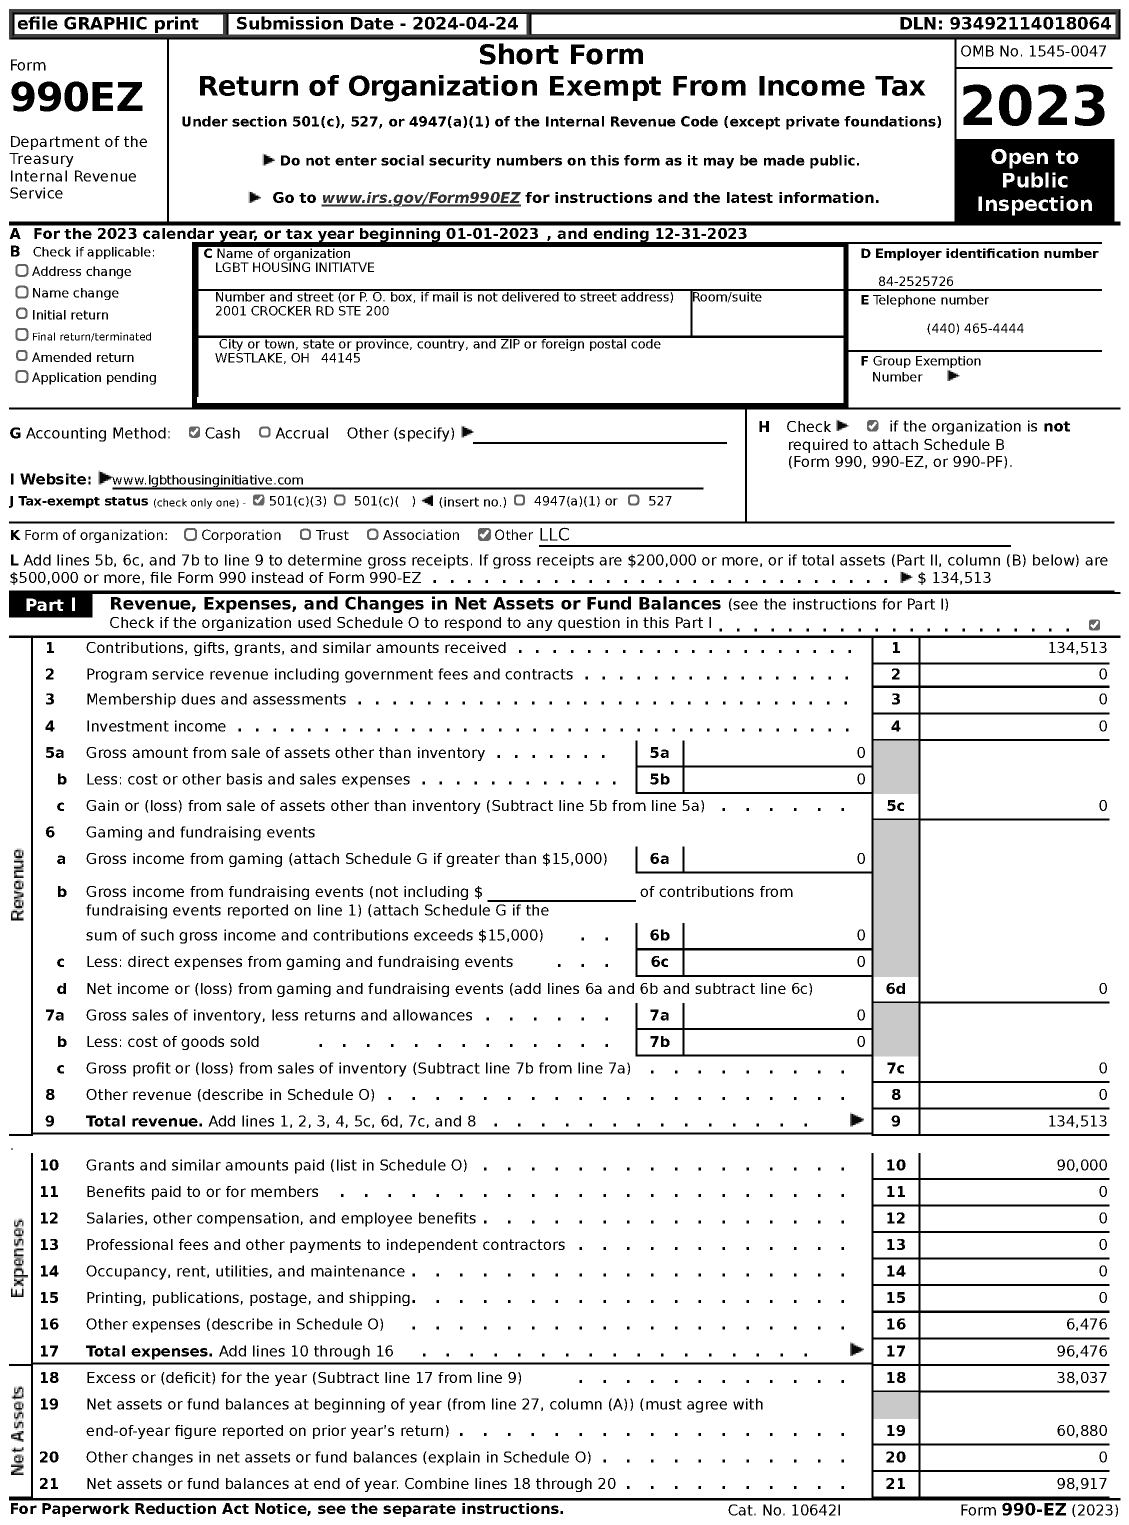 Image of first page of 2023 Form 990EZ for LGBT Housing Initiatve